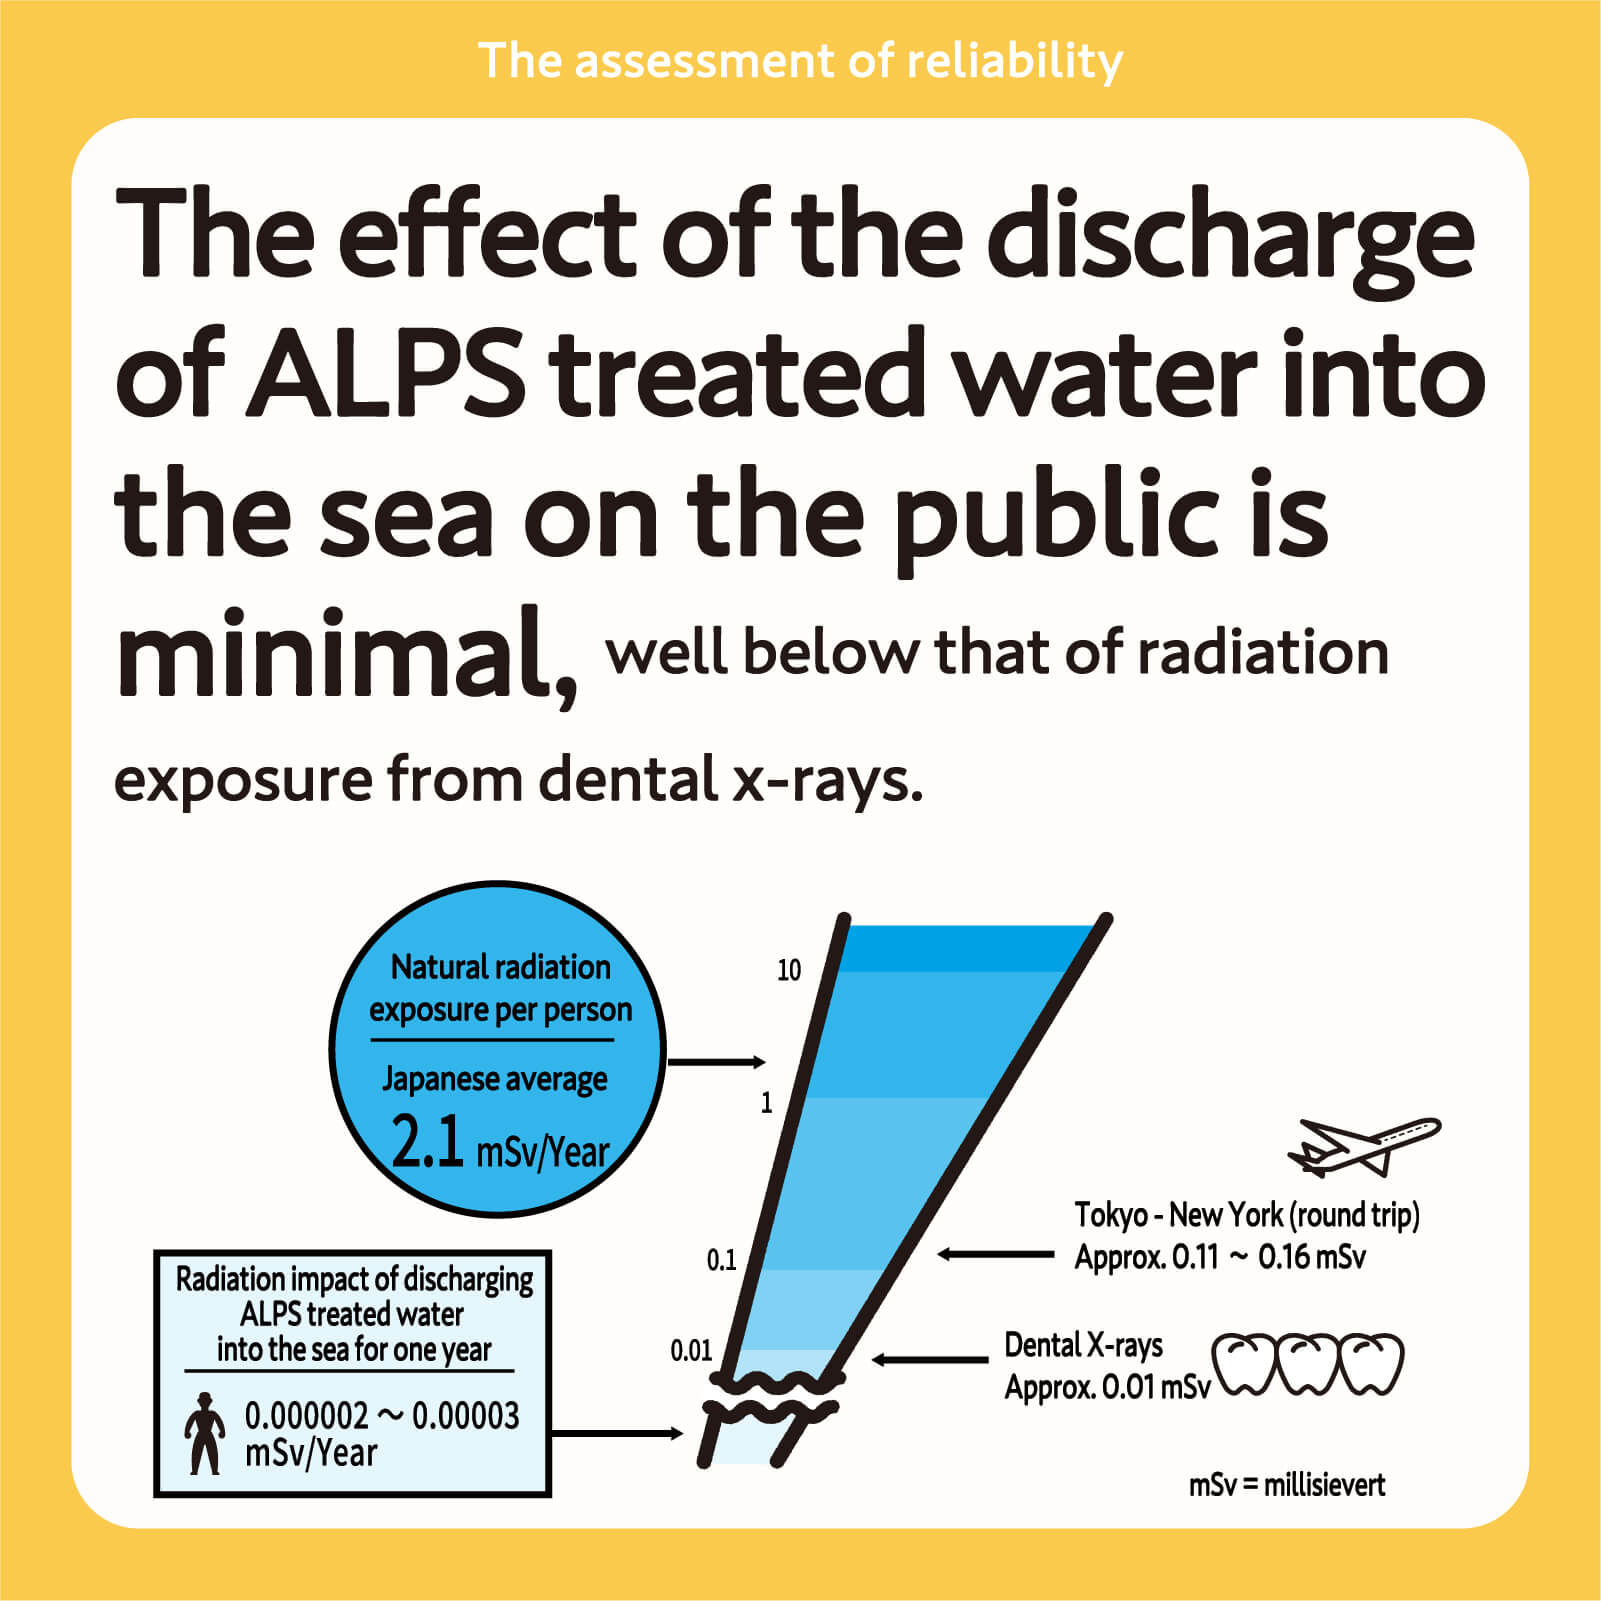 The effect of the discharge of ALPS treated water into the sea on the public is minimal, well below that of radiation exposure from dental x-rays.